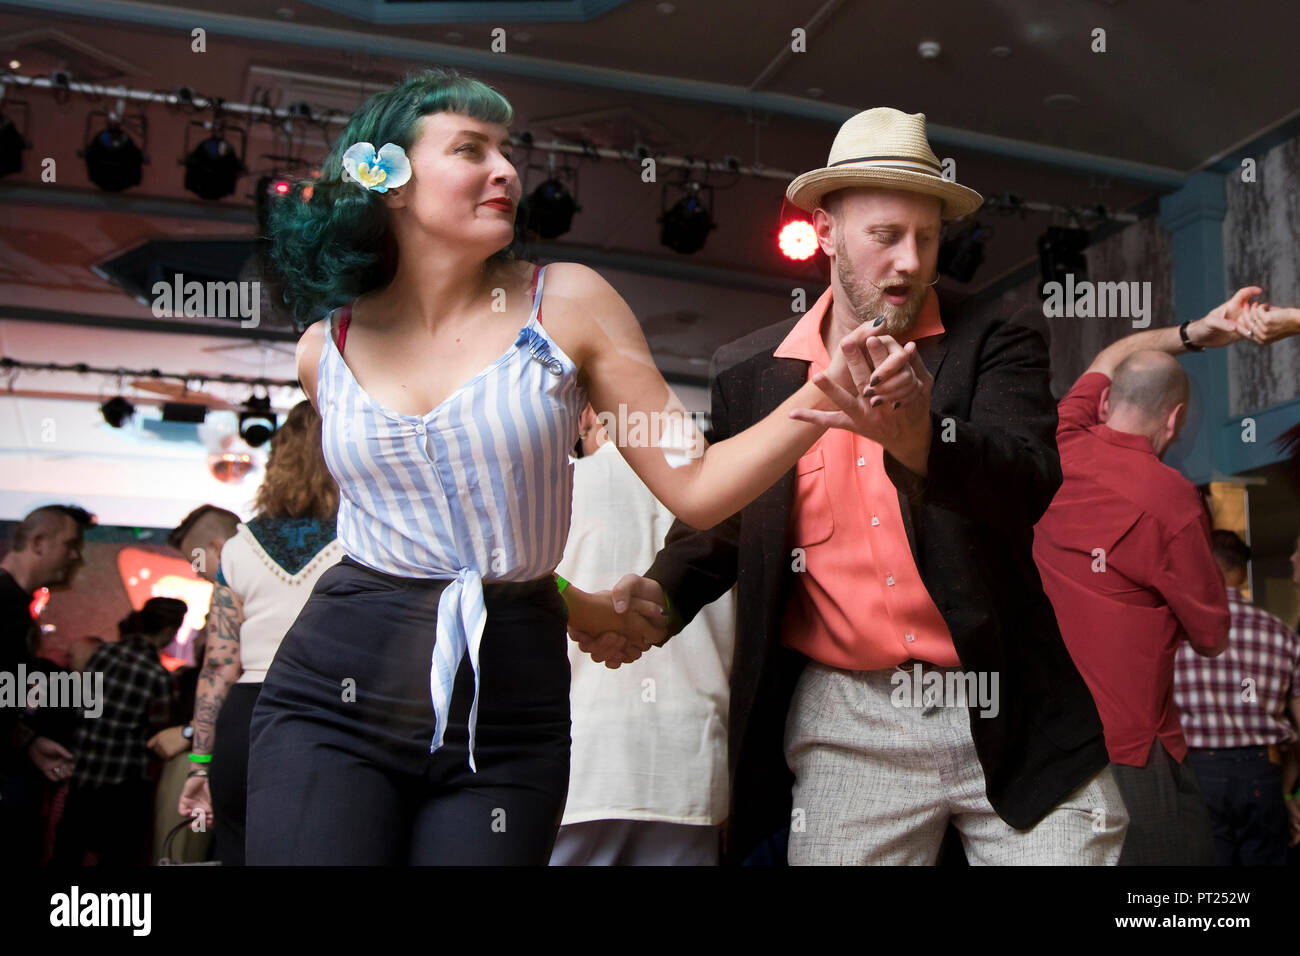 Norfolk, UK. 5 October 2018.  Rock 'n' Roll fans, artists and retro traders gather for the last Hemsby Rock 'n' Roll Weekender in Norfolk, England. Rockabilly music, bop and jive dancing, 50s fashion and hairstyles, classic motors and other 1950s Americana converge for the 61st Weekender, the first of the bi-annual festivals being held in 1988. Photo: Adrian Buck / Alamy Live News. Stock Photo